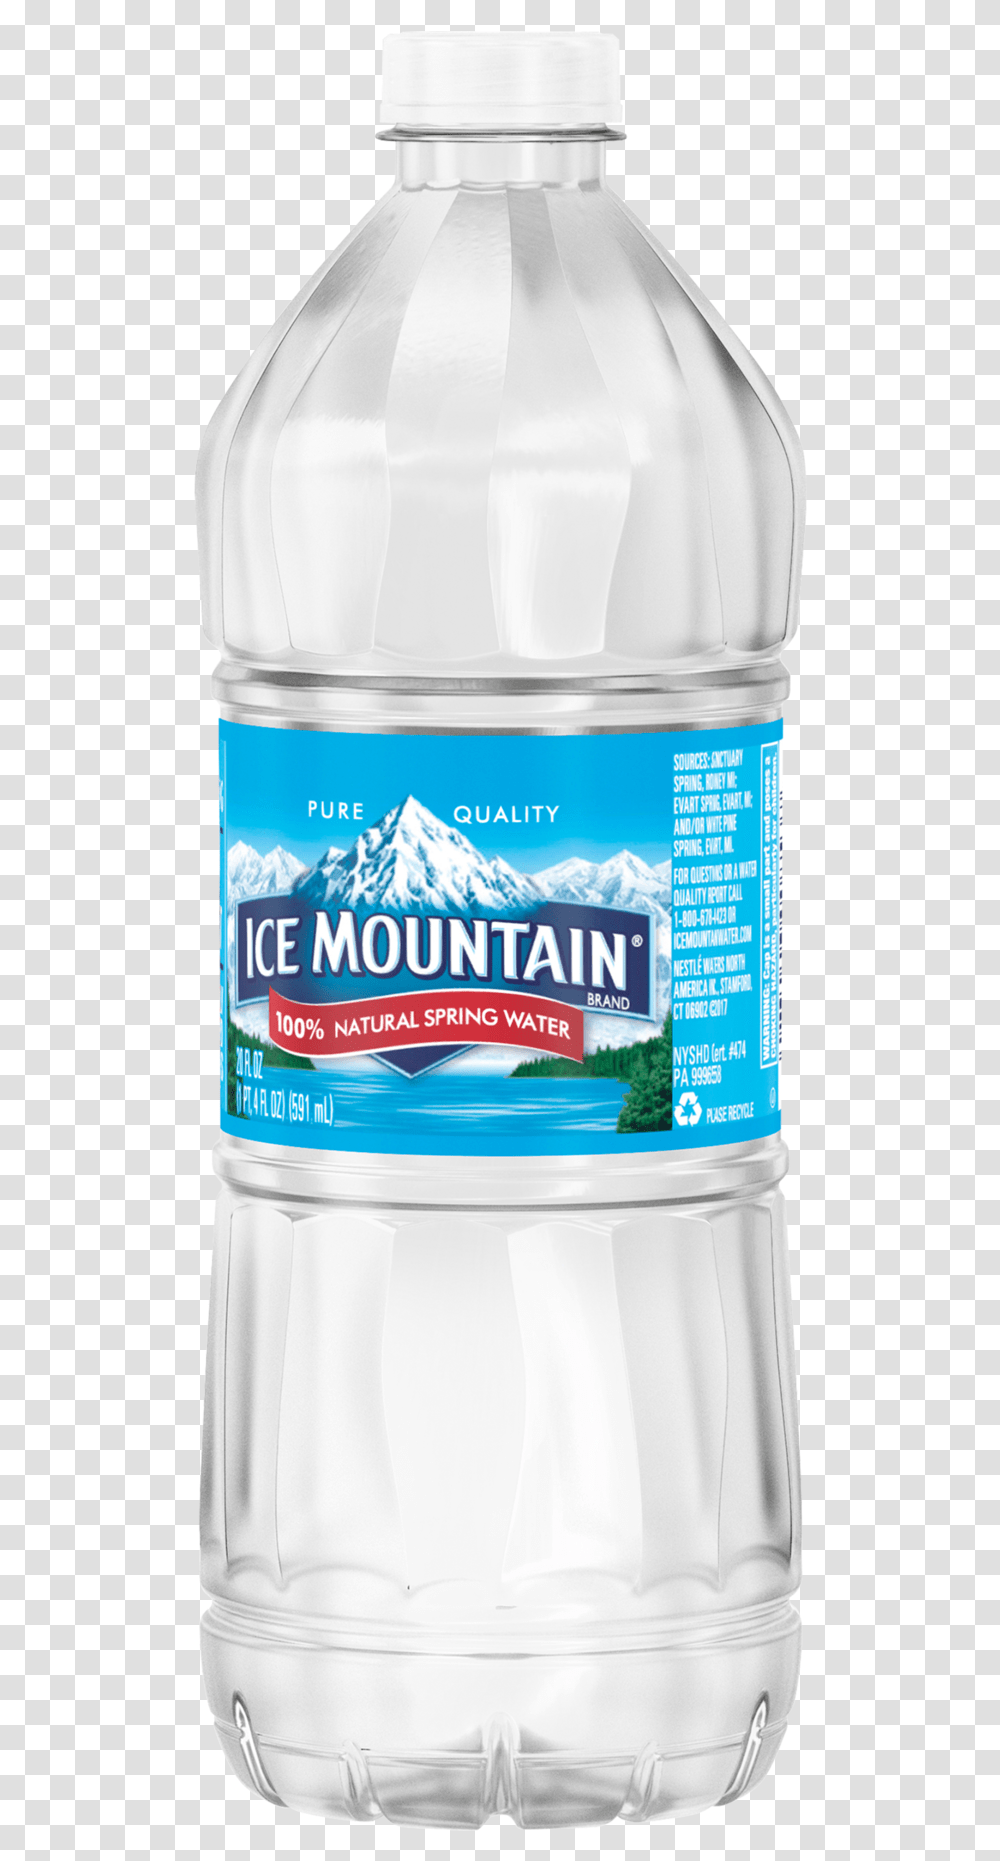 Ice Mountain Water Download Mineral Water, Bottle, Beverage, Water Bottle, Drink Transparent Png